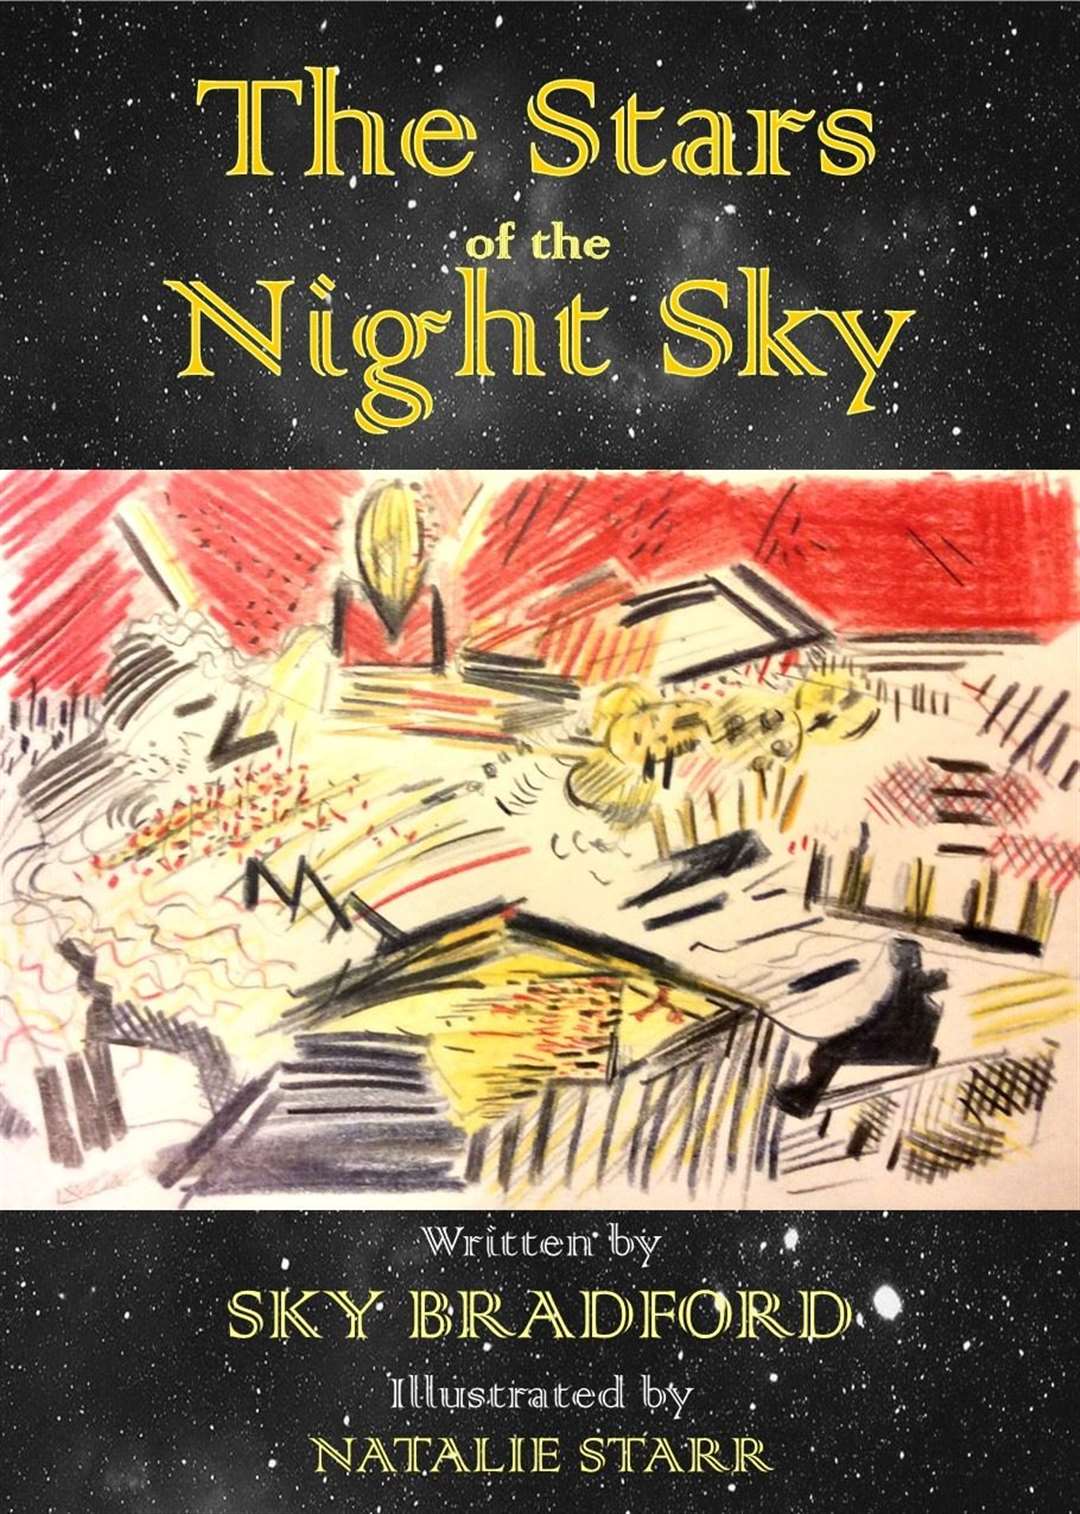 The Stars of the Night Sky was published by Sky Bradford, 11, with illustrations by Natalie Starr